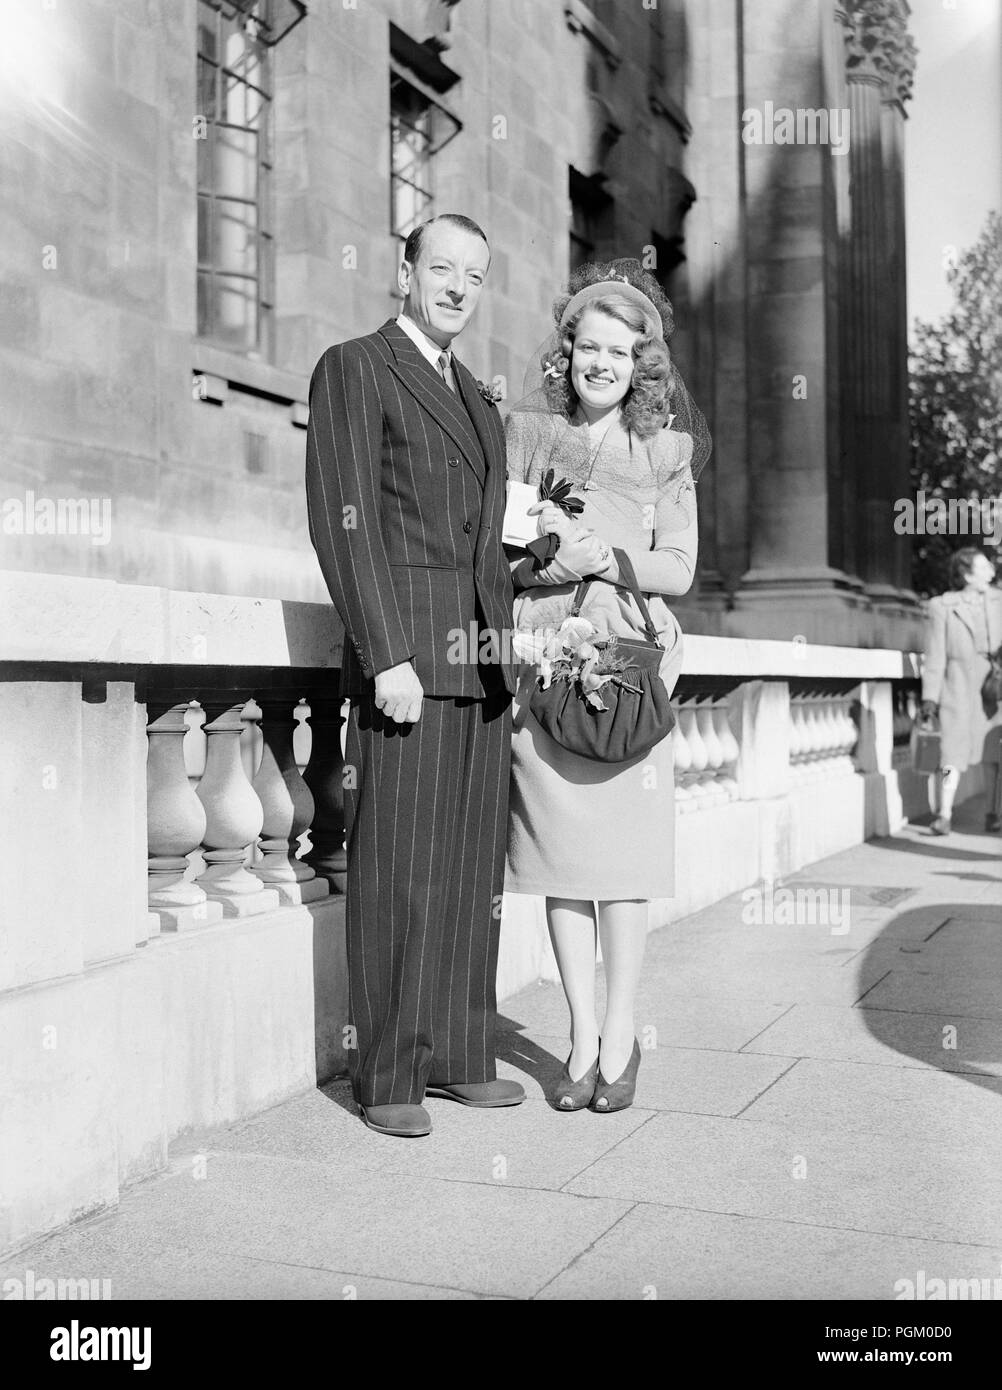 11th September 1946. The wedding of Mr. George Burnside, a director of Erwin Wasey, the advertising agents, and Miss. Signe Nyman, a 25 year old Swedish resident, living in London. The wedding took place at St. Marylebone Register Office in London. Stock Photo